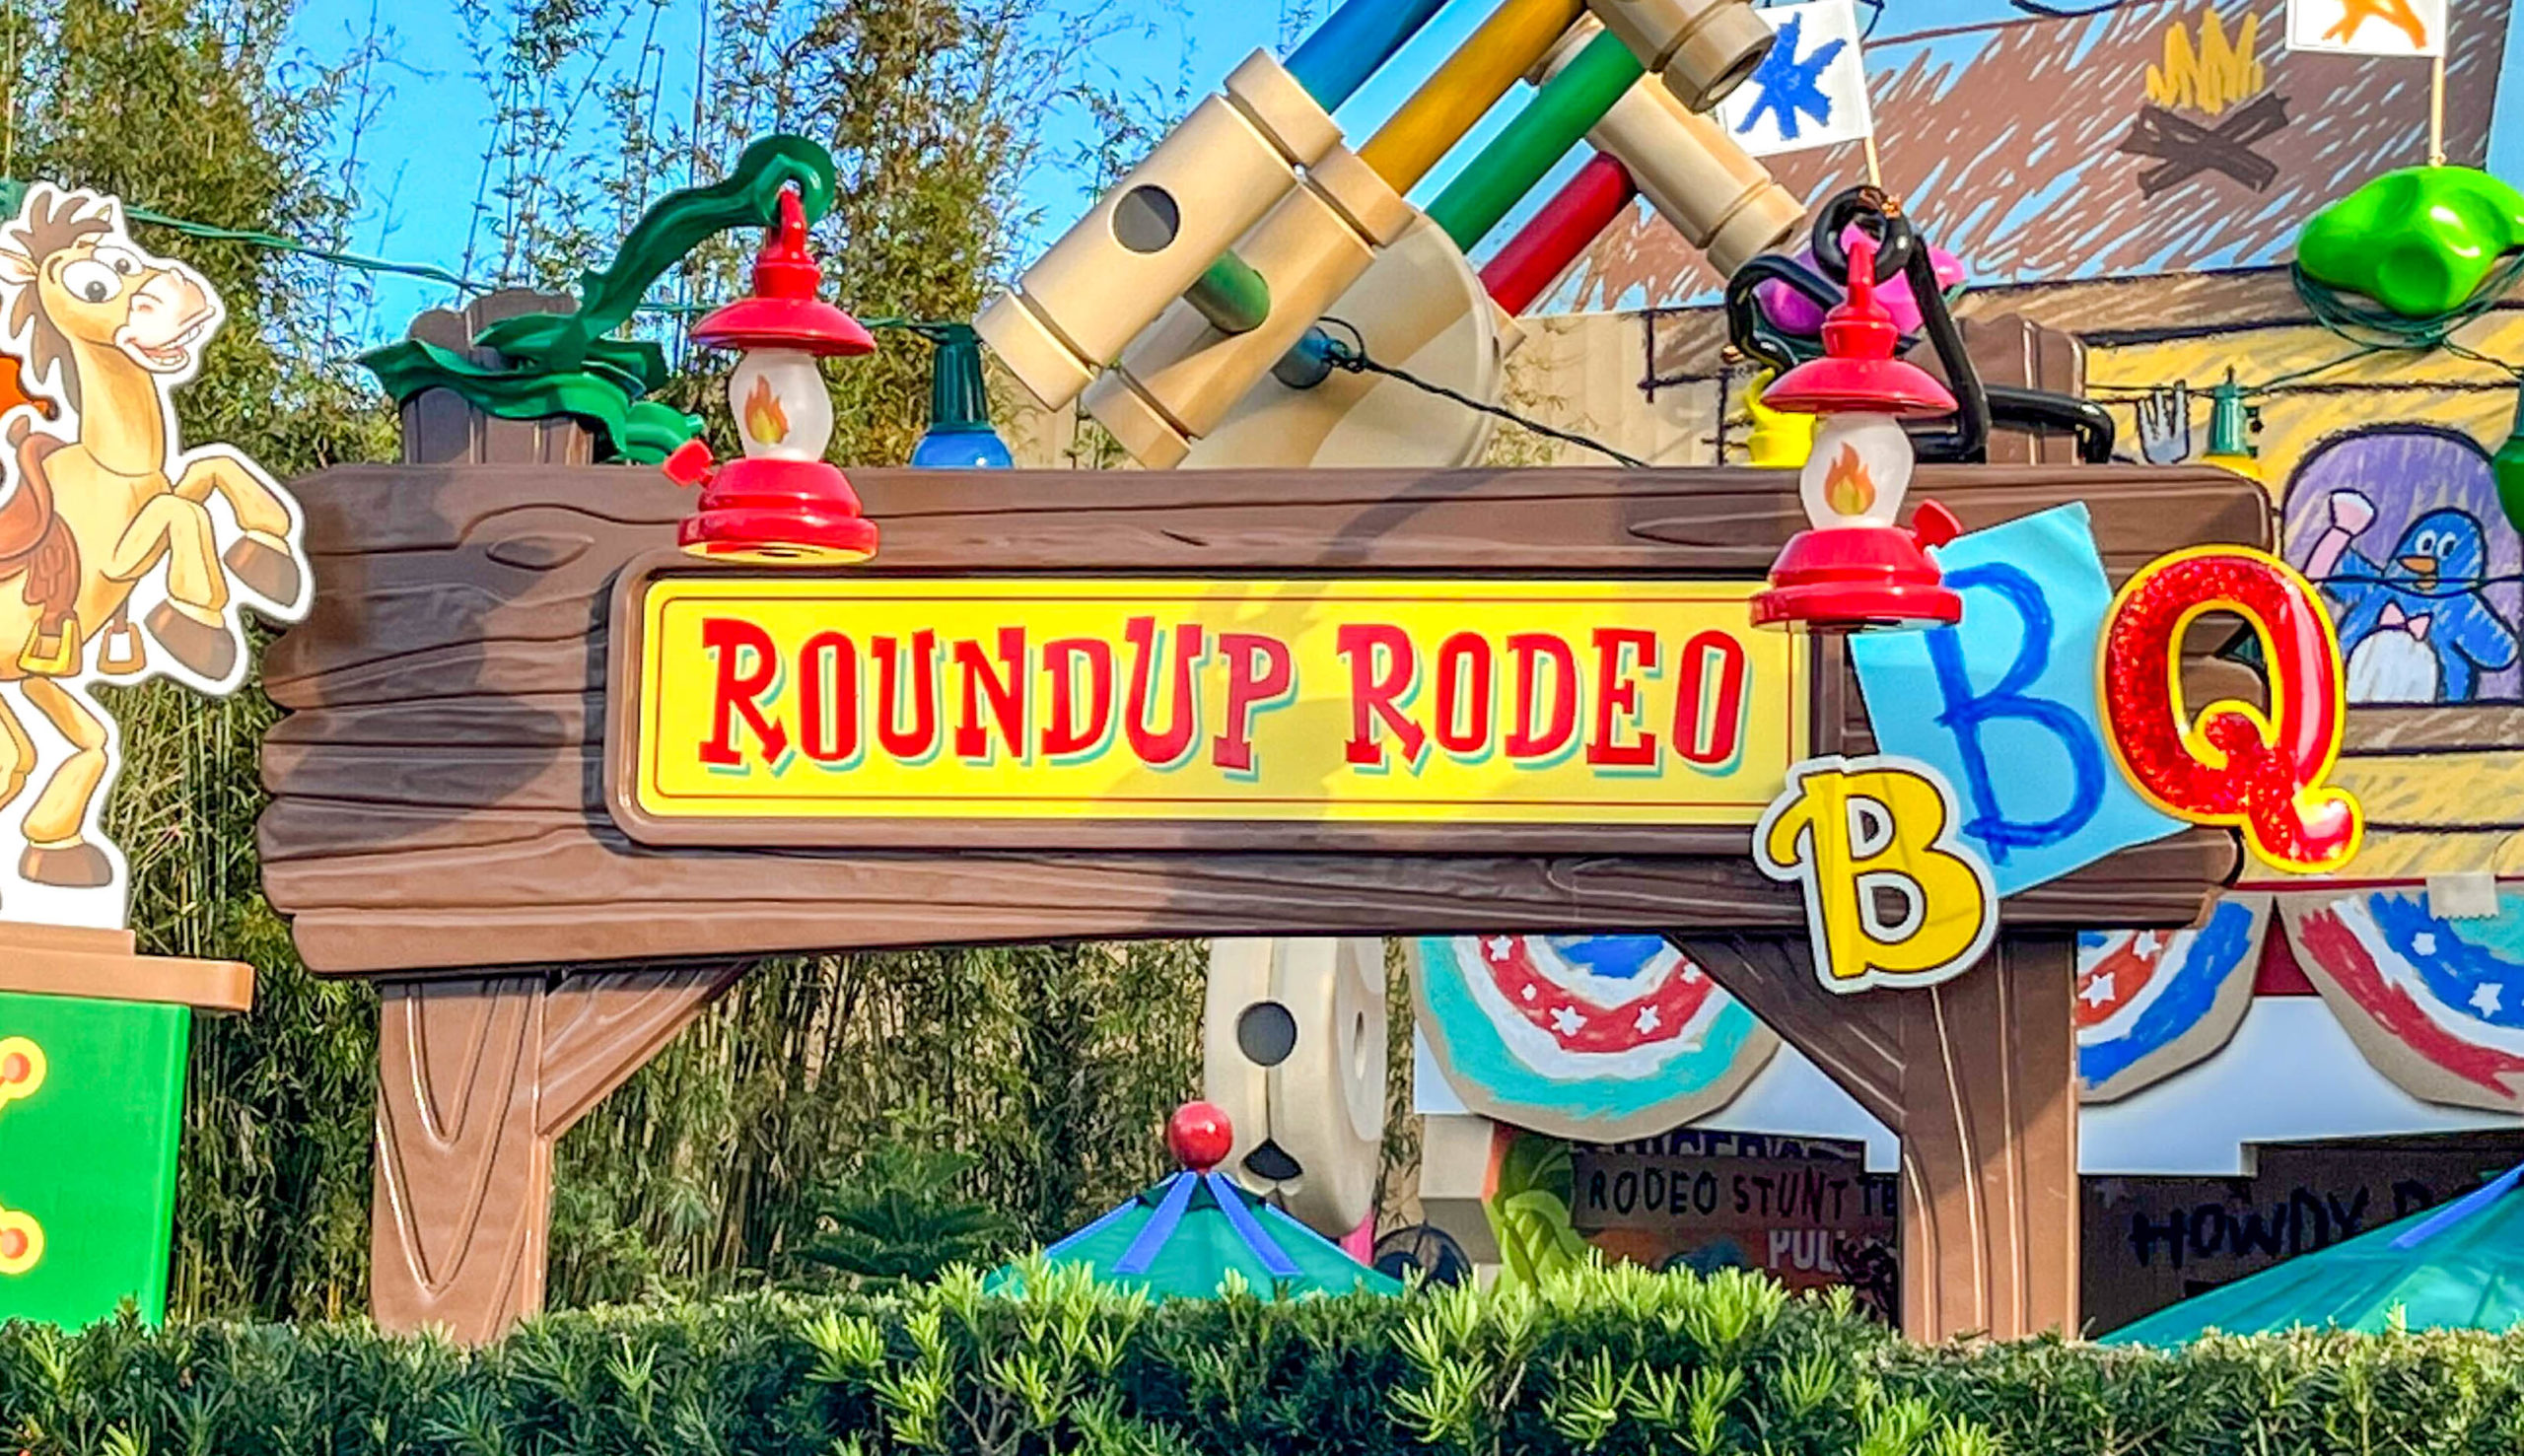 Roundup Rodeo BBQ sign